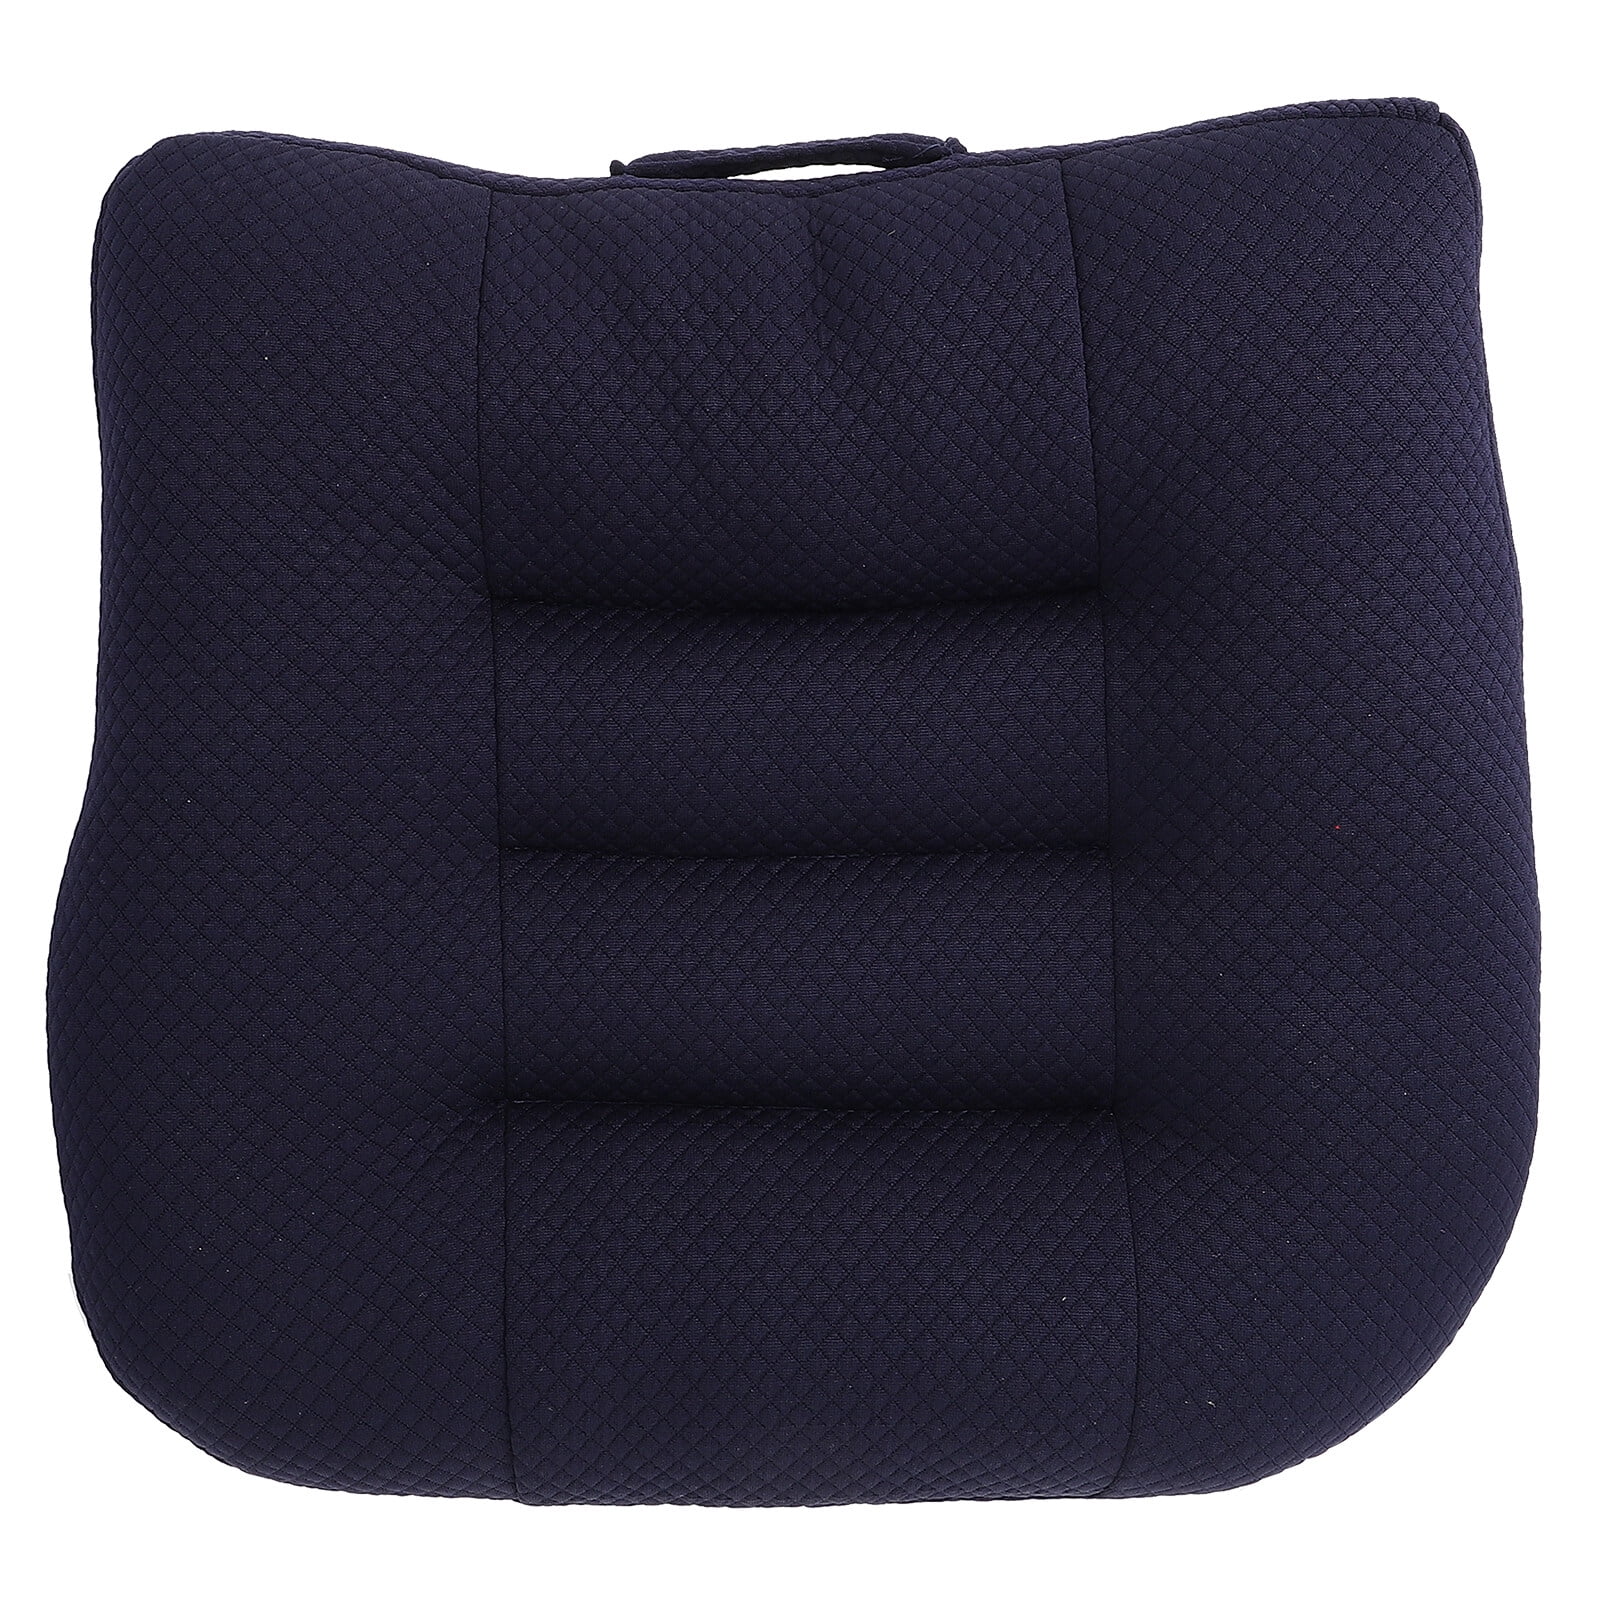 NEW! Car Booster Pillow/Cushion - household items - by owner - housewares  sale - craigslist